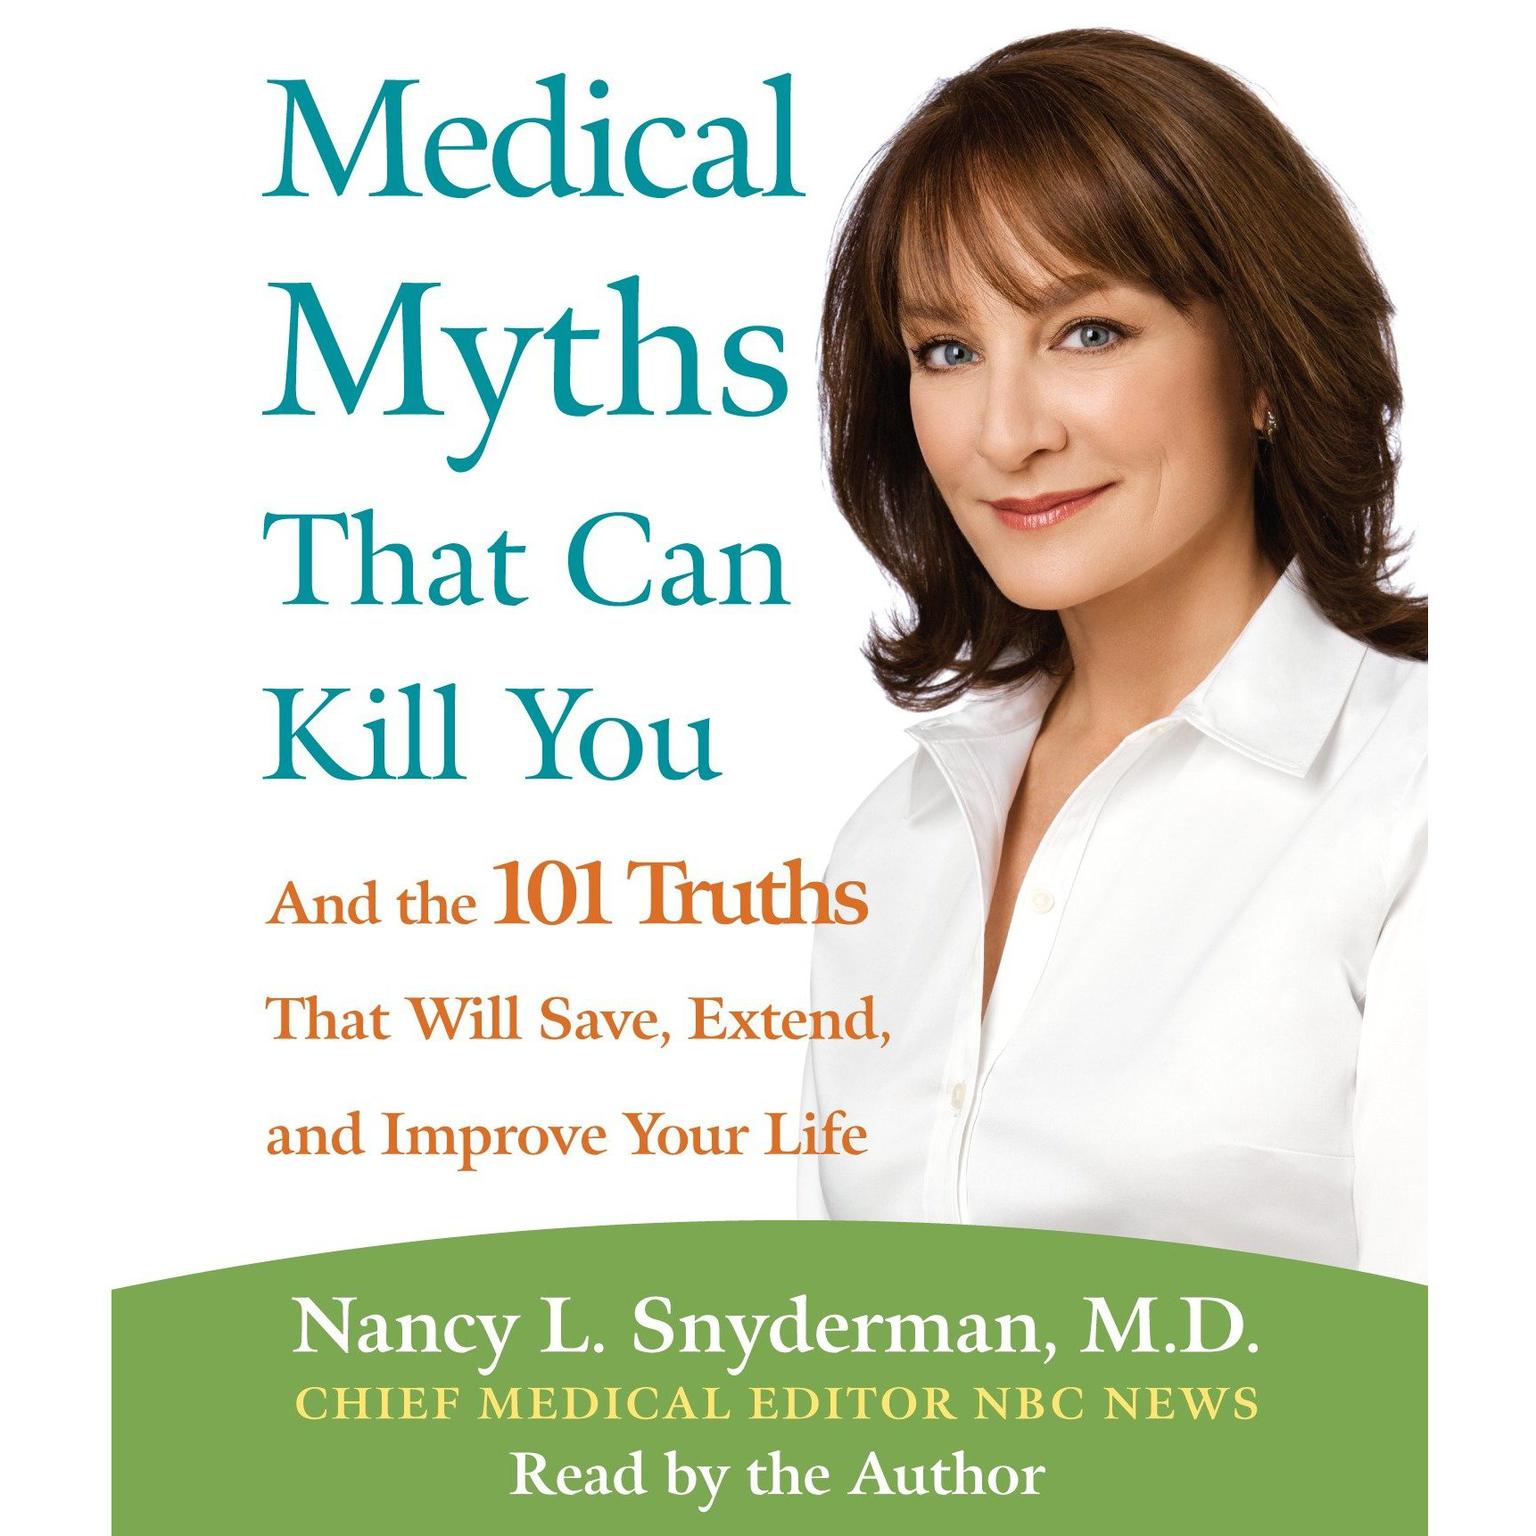 Medical Myths That Can Kill You (Abridged): And the 101 Truths That Will Save, Extend, and Improve Your Life Audiobook, by Nancy L. Snyderman